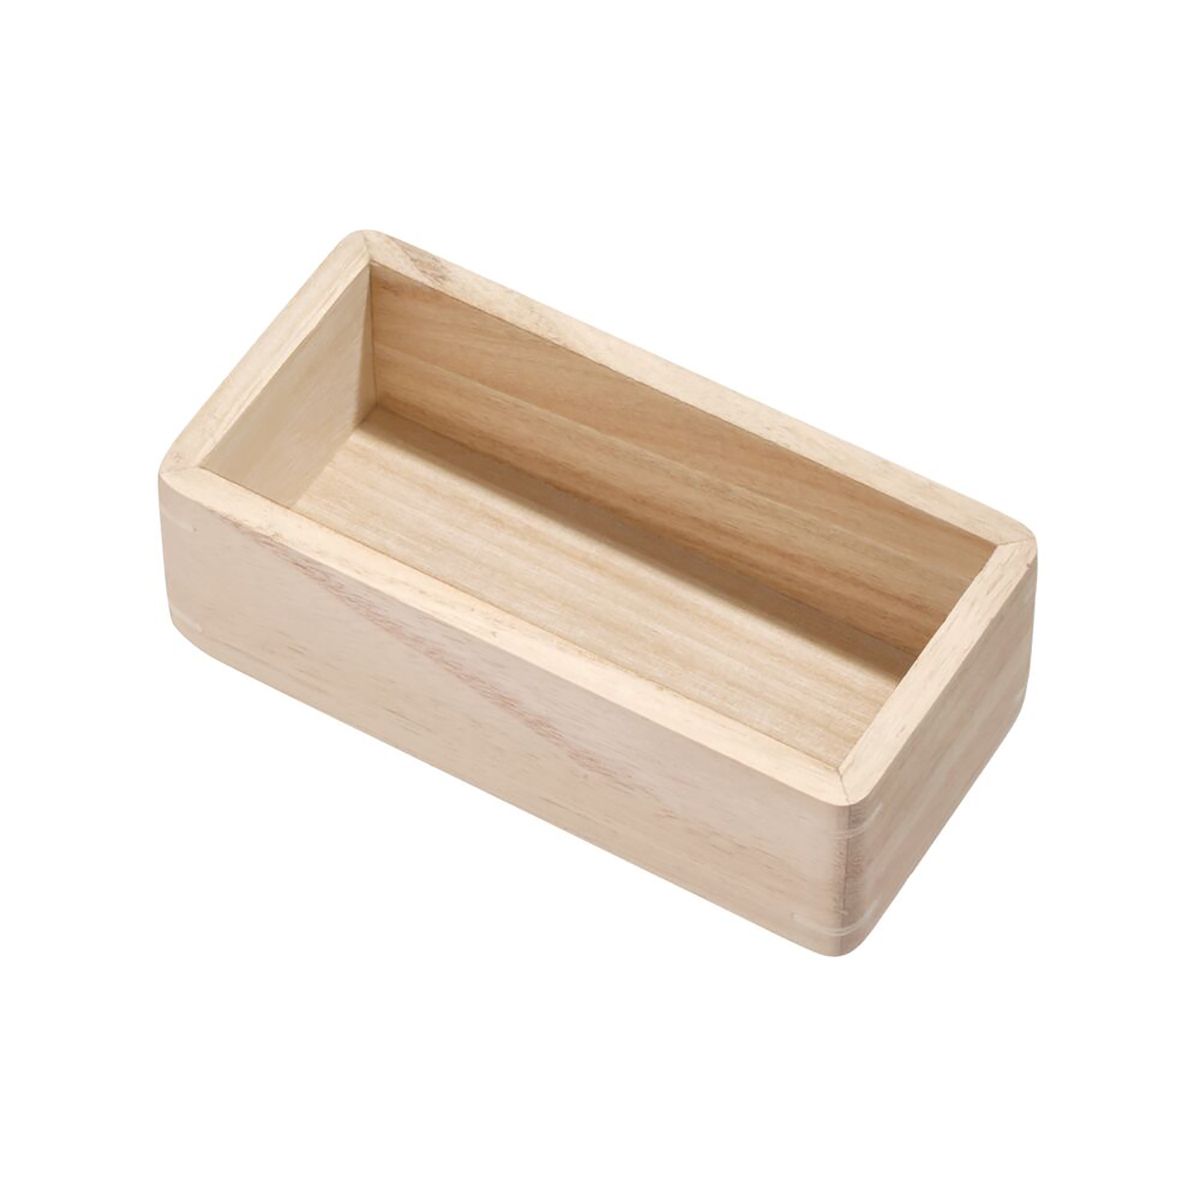 Wooden Drawer Organizer | The Container Store